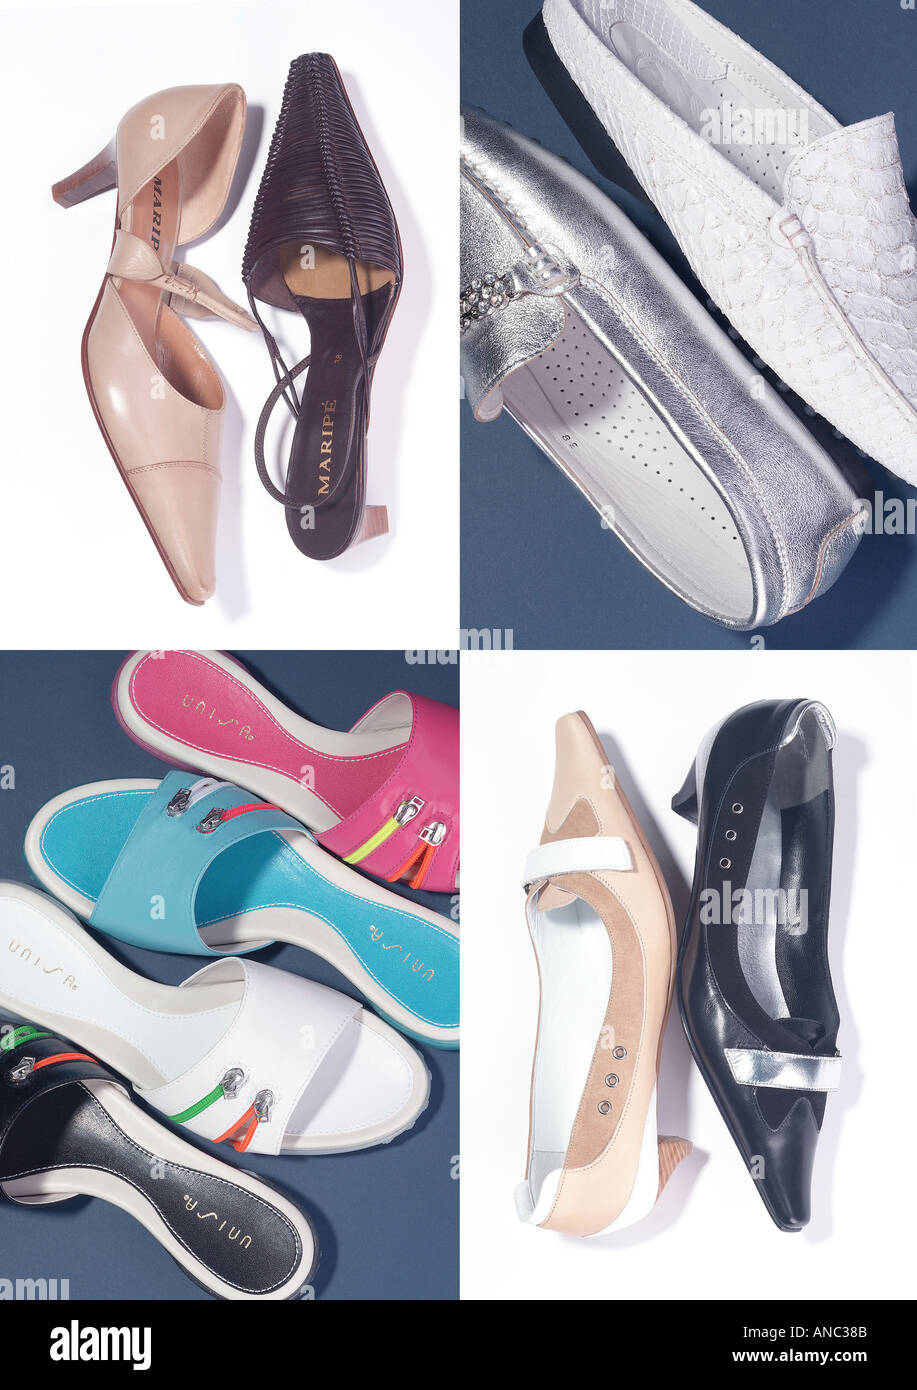 All Shoes Collection for Women